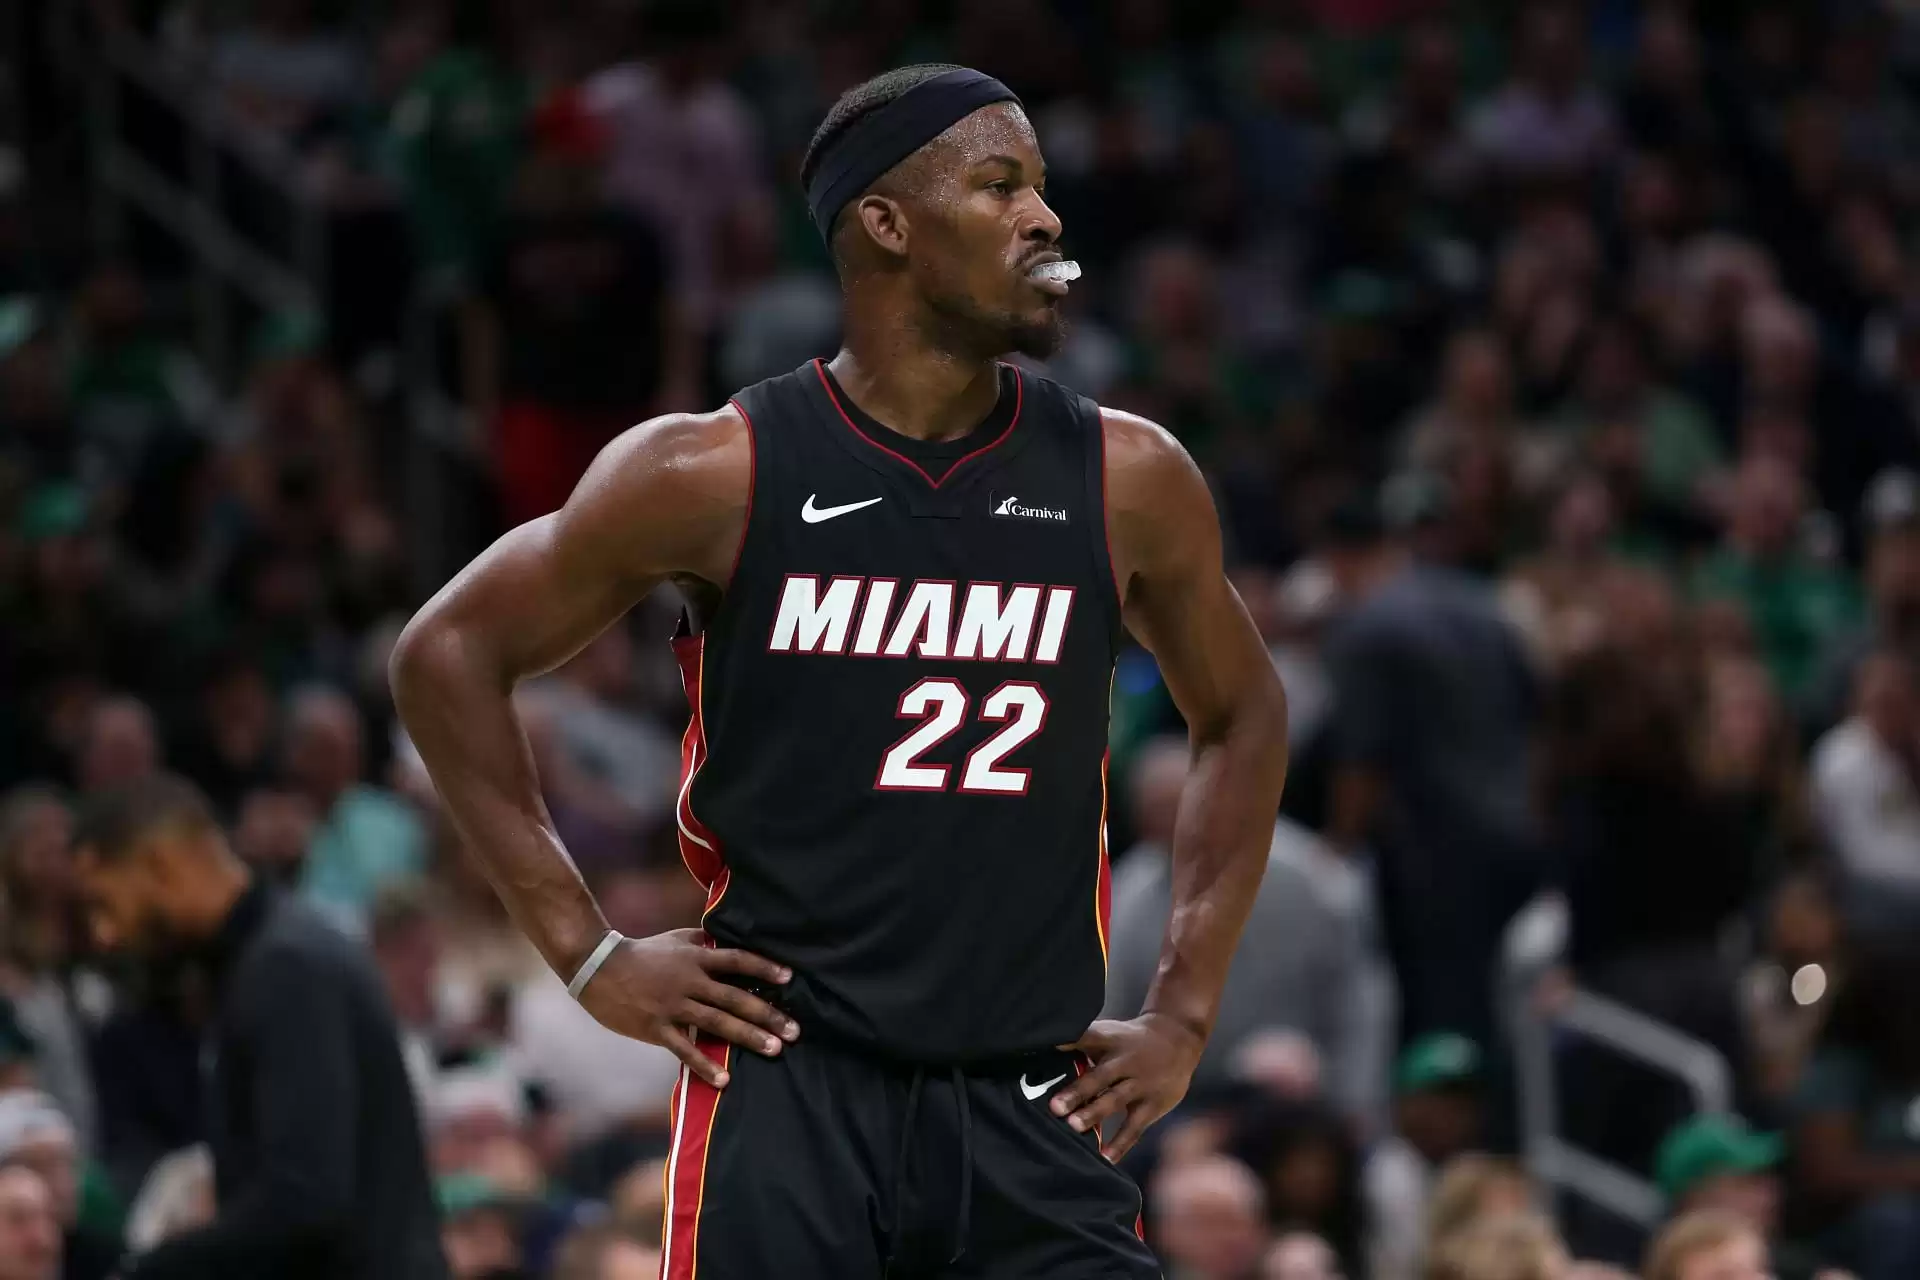 Miami Heat wins 7 straight after losing first 4 games, stunning NBA fans with 